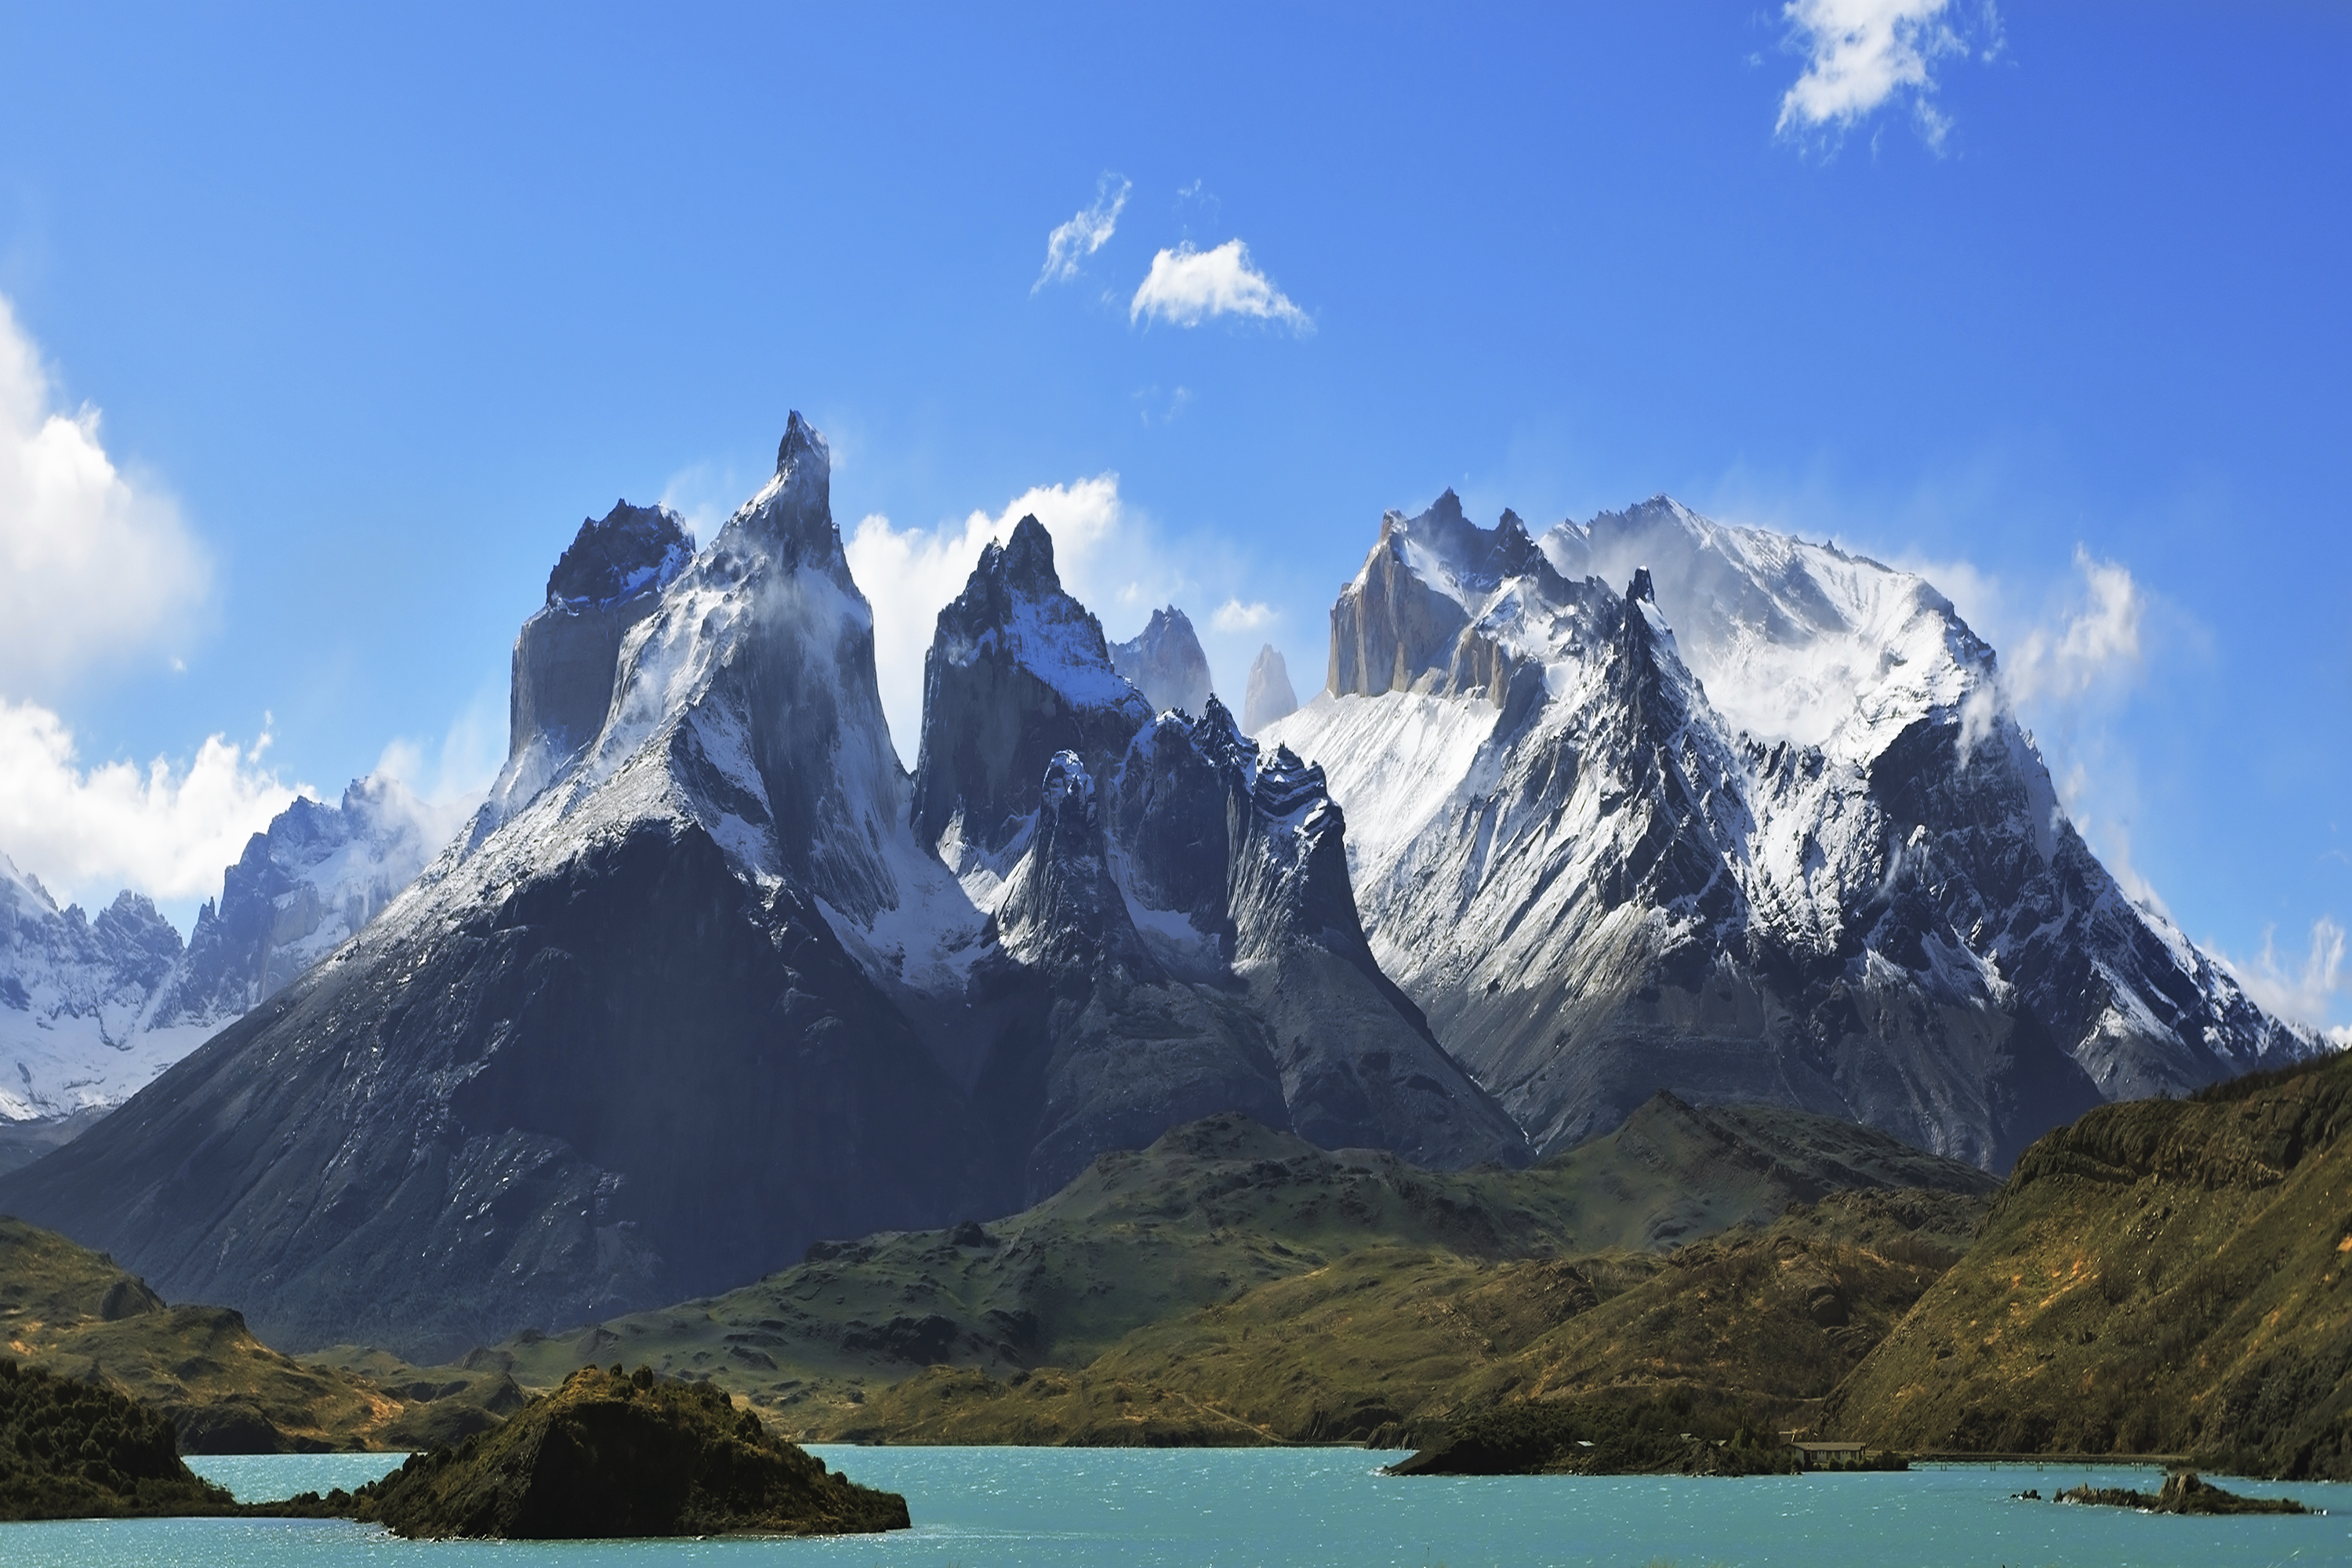 chile attractions